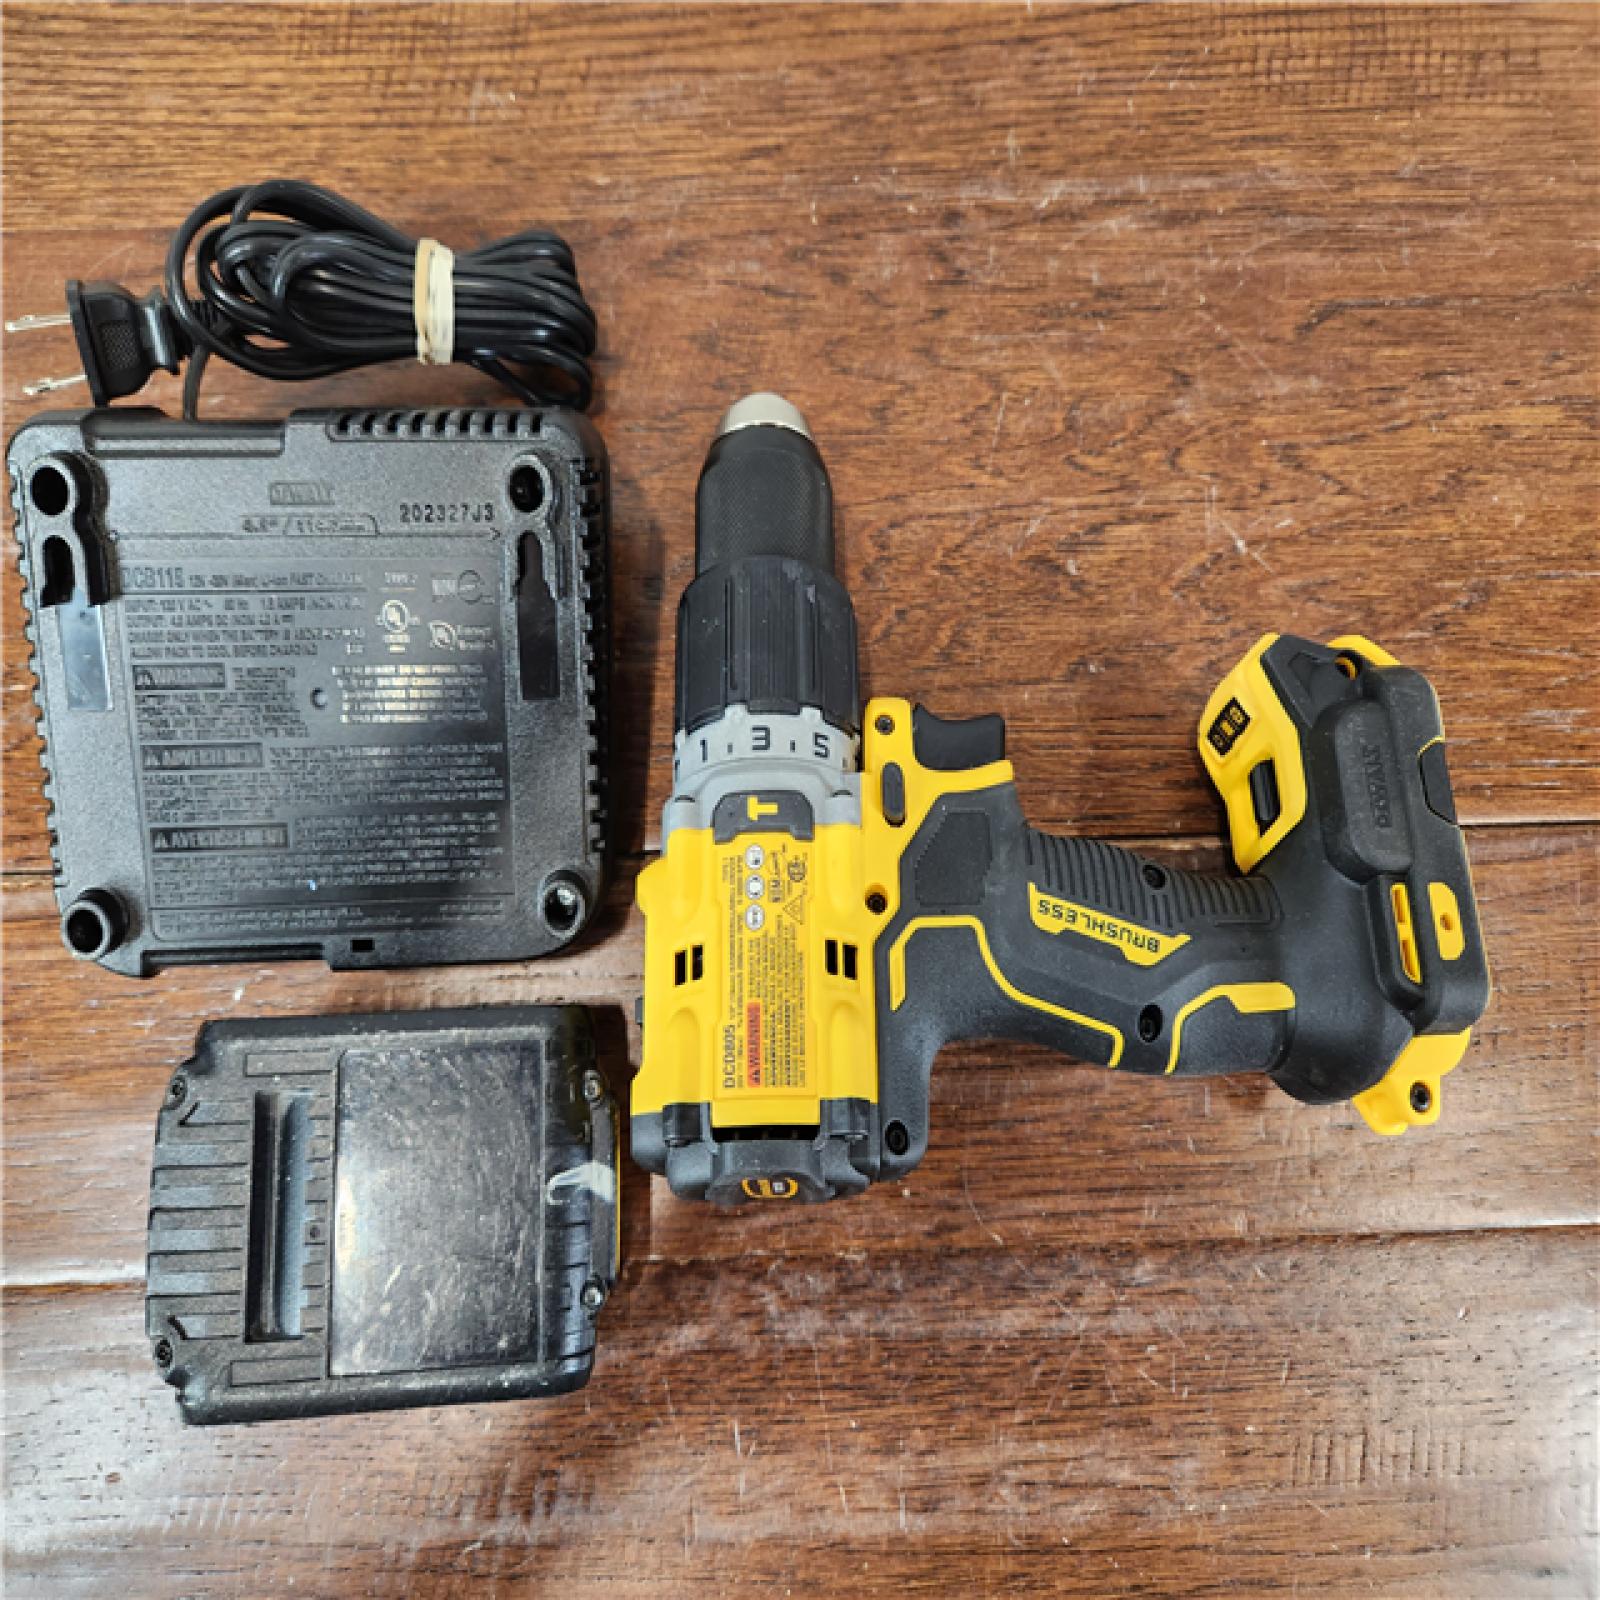 AS-IS DEWALT 20V MAX XR Brushless Cordless Lithium-Ion 1/2 Hammer Drill/Driver Kit